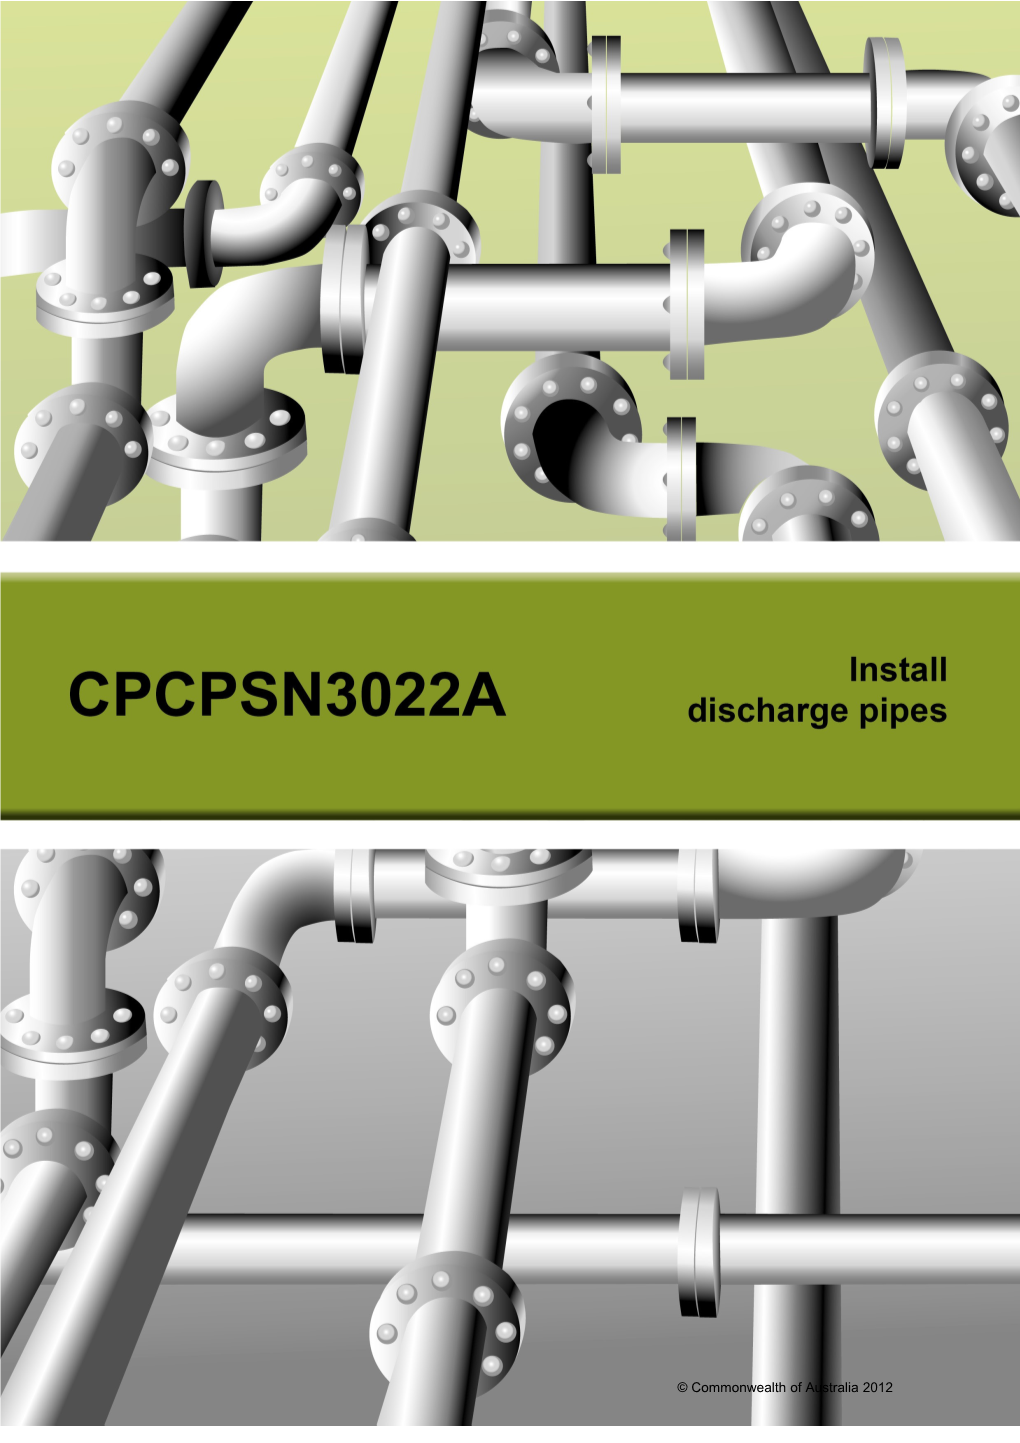 Cpcpsn3022a - Install Discharge Pipes